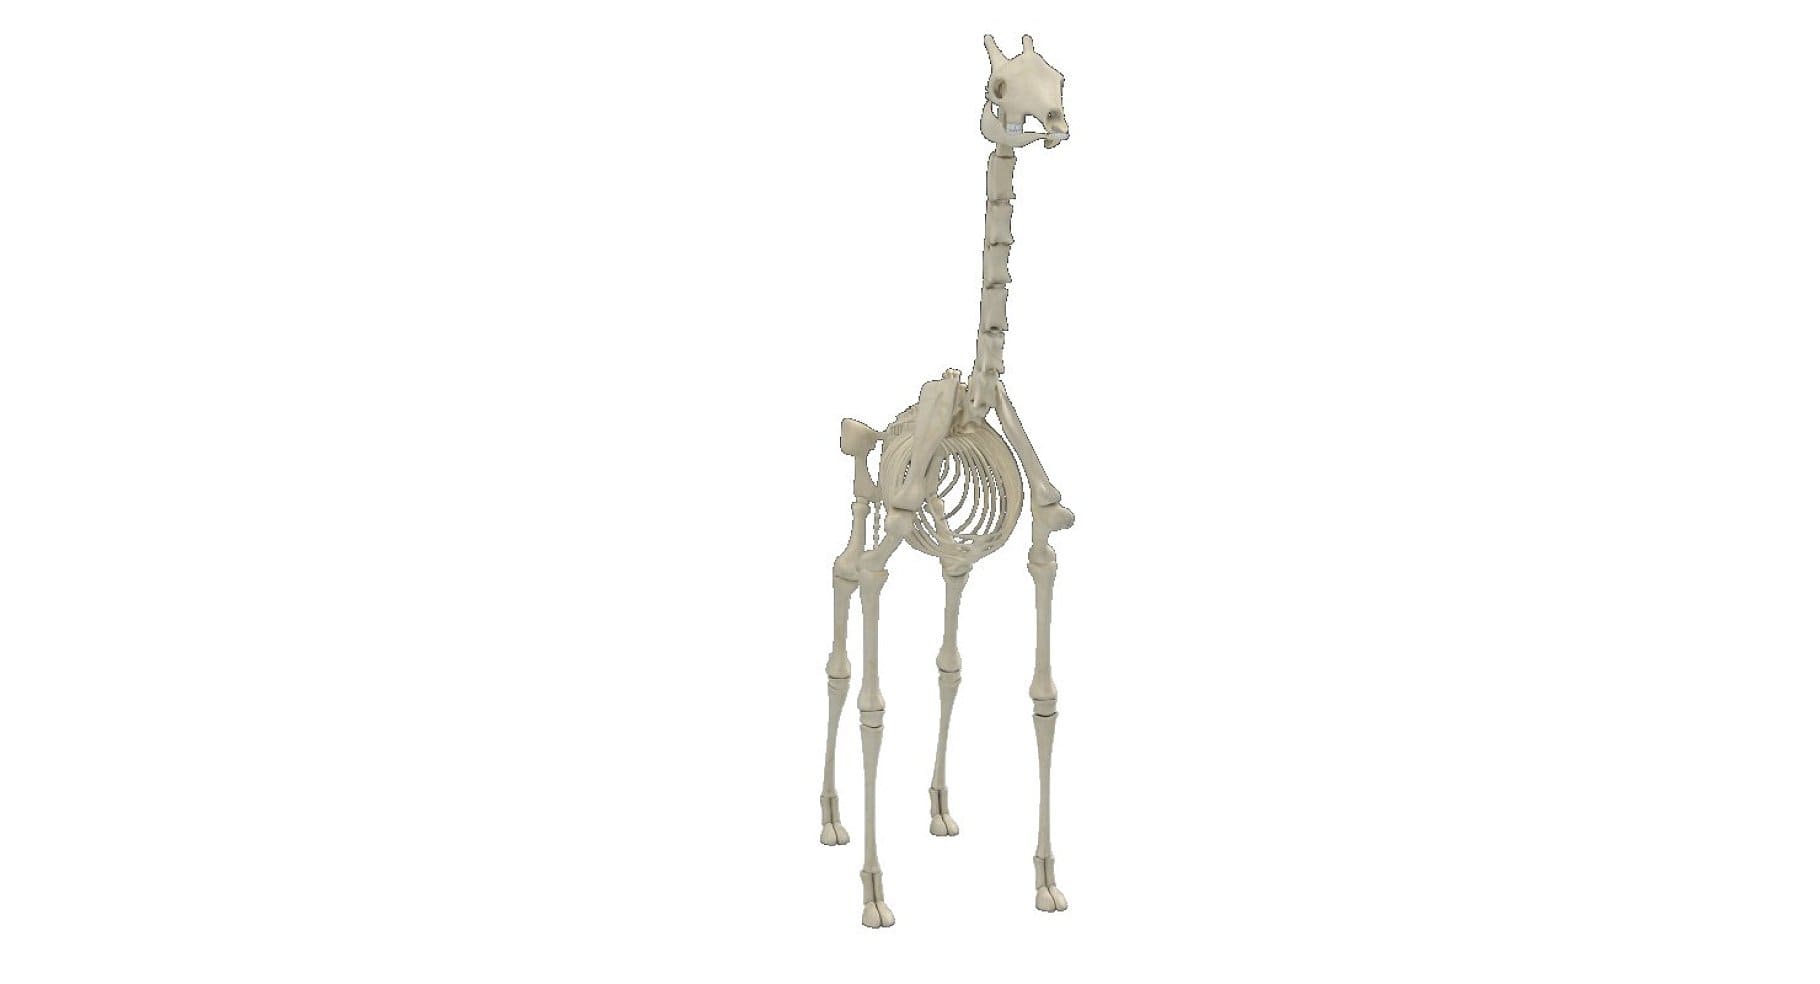 An image of the joints of a giraffe skeleton.